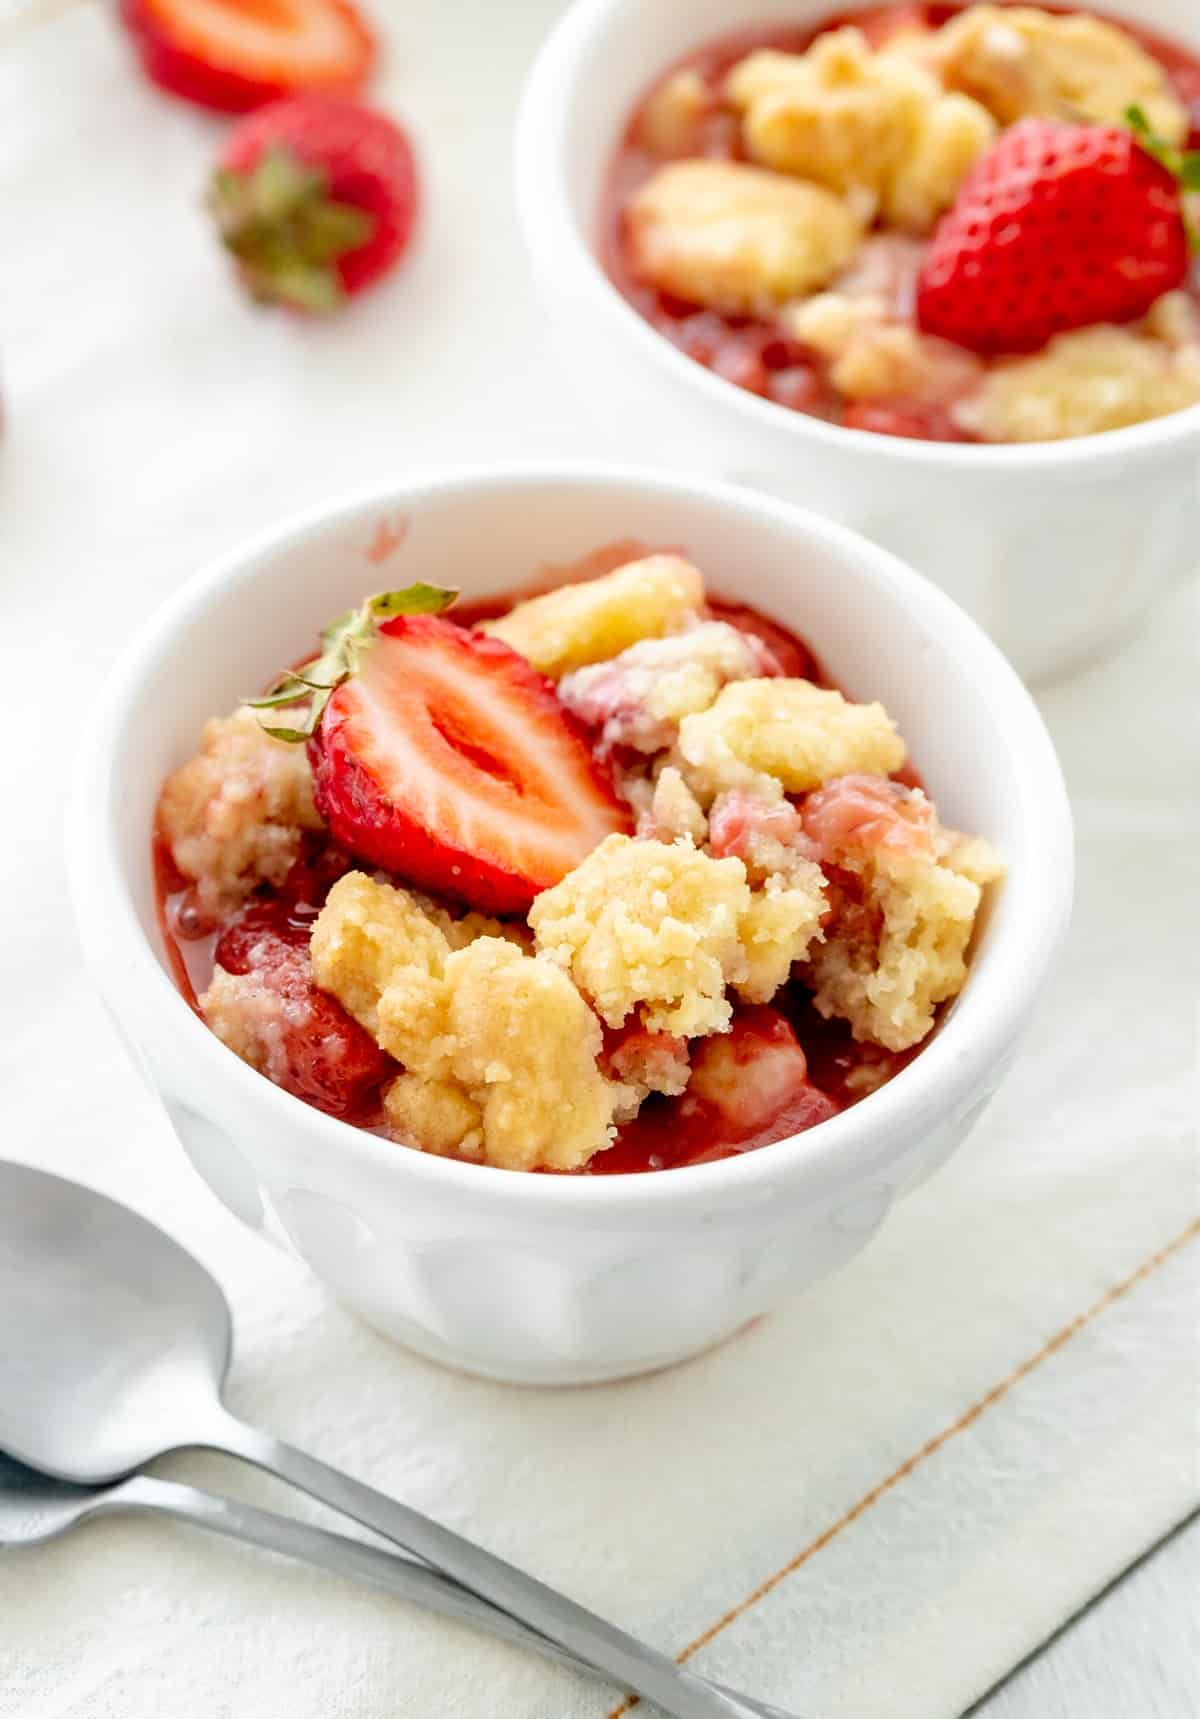 Two white bowls with servings of strawberry cobbler, white linen surface, a few fresh cut strawberries.